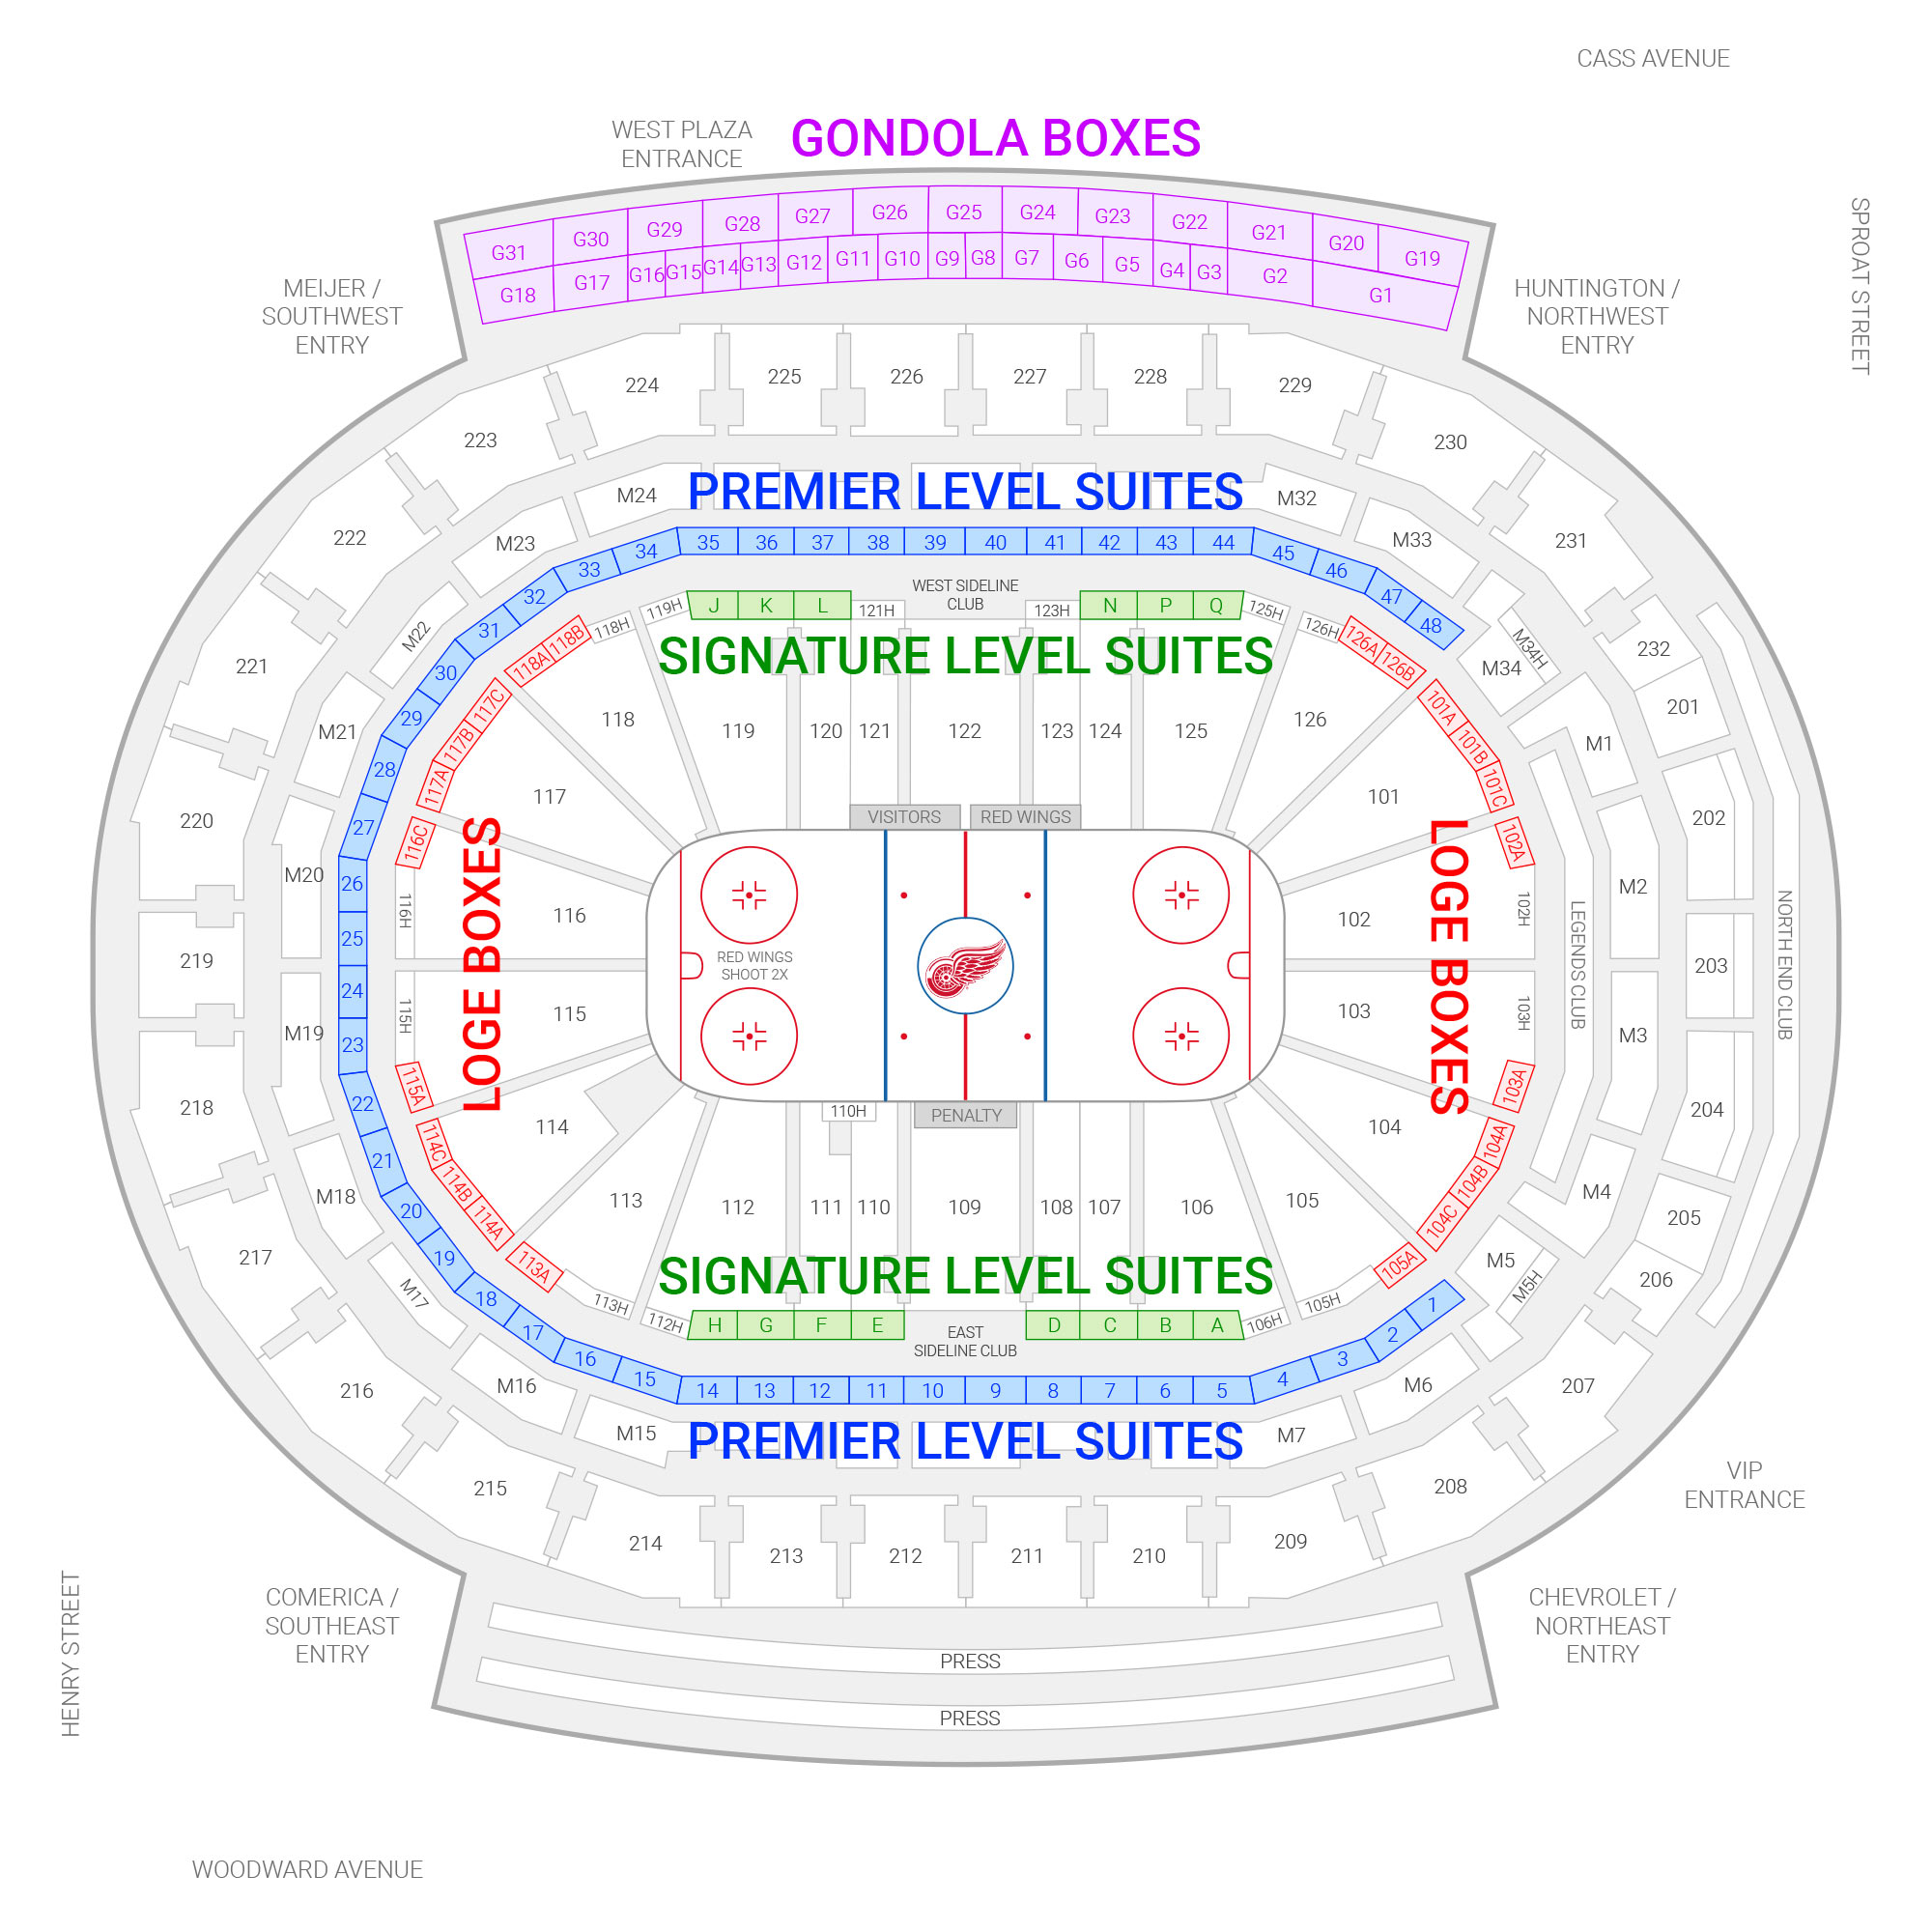 NHL 16 Arena Atmosphere Details (Wild, Red Wings, Flames, Capitals